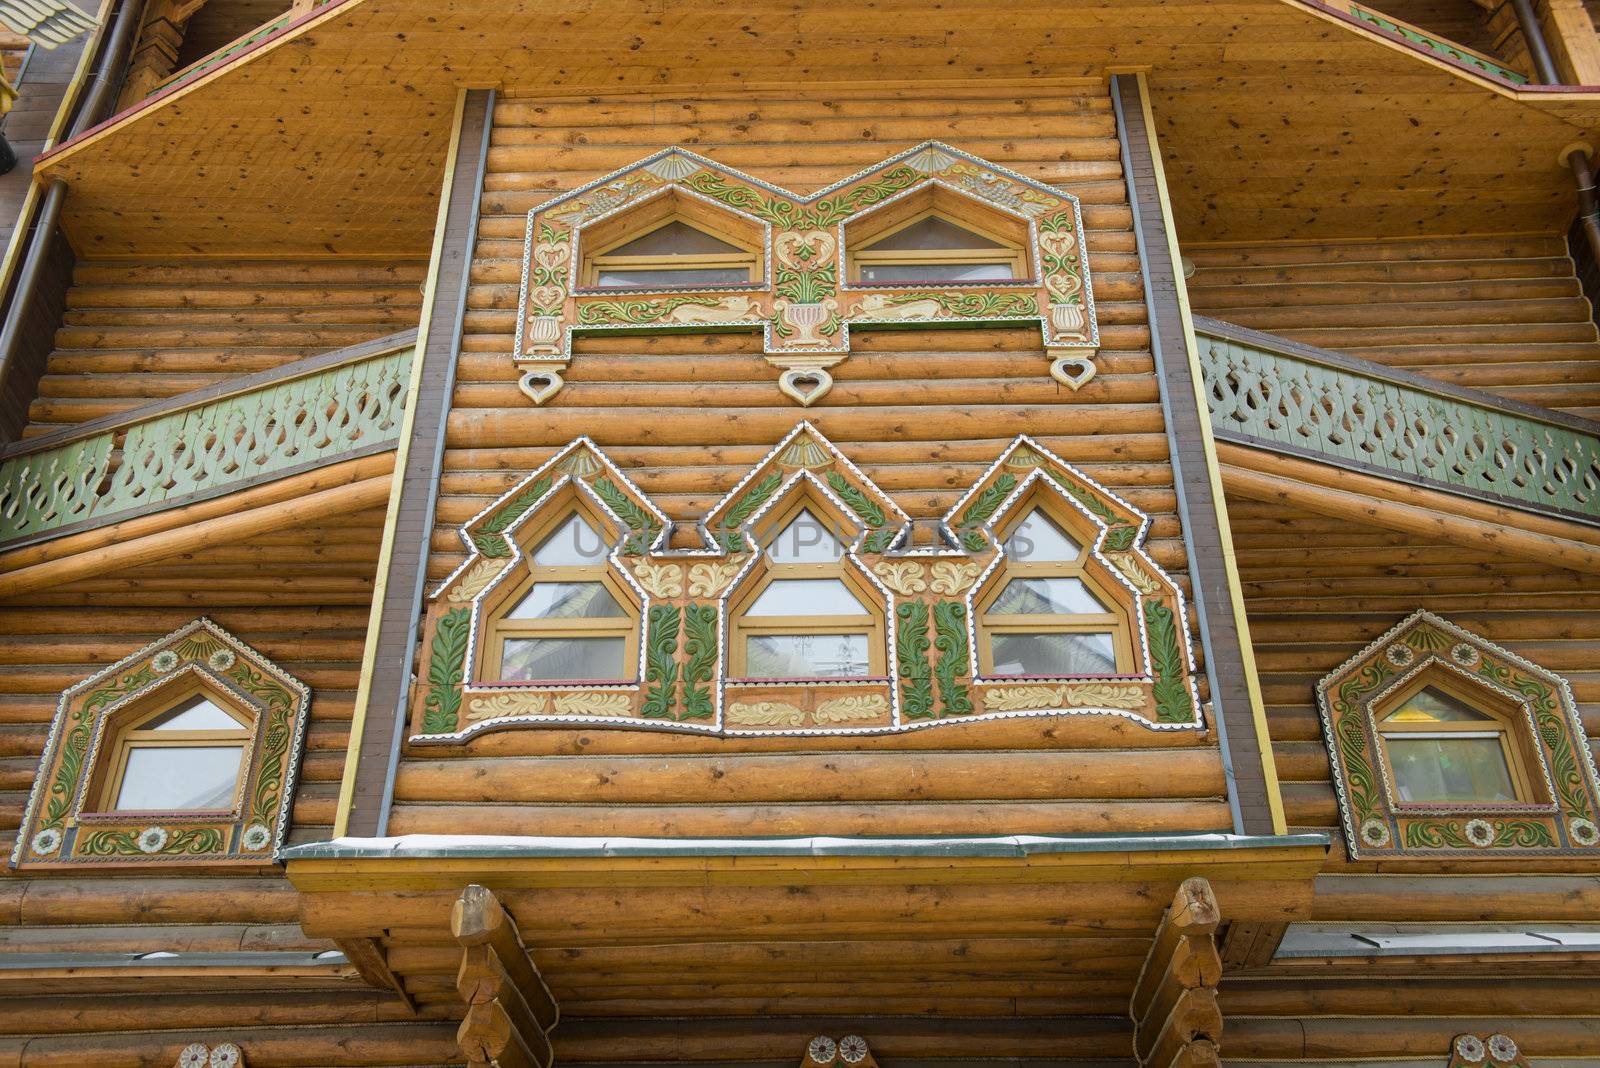 Traditional raussian ornament of wooden house in Izmailovskiy Kremlin, Moscow  - January 2013.